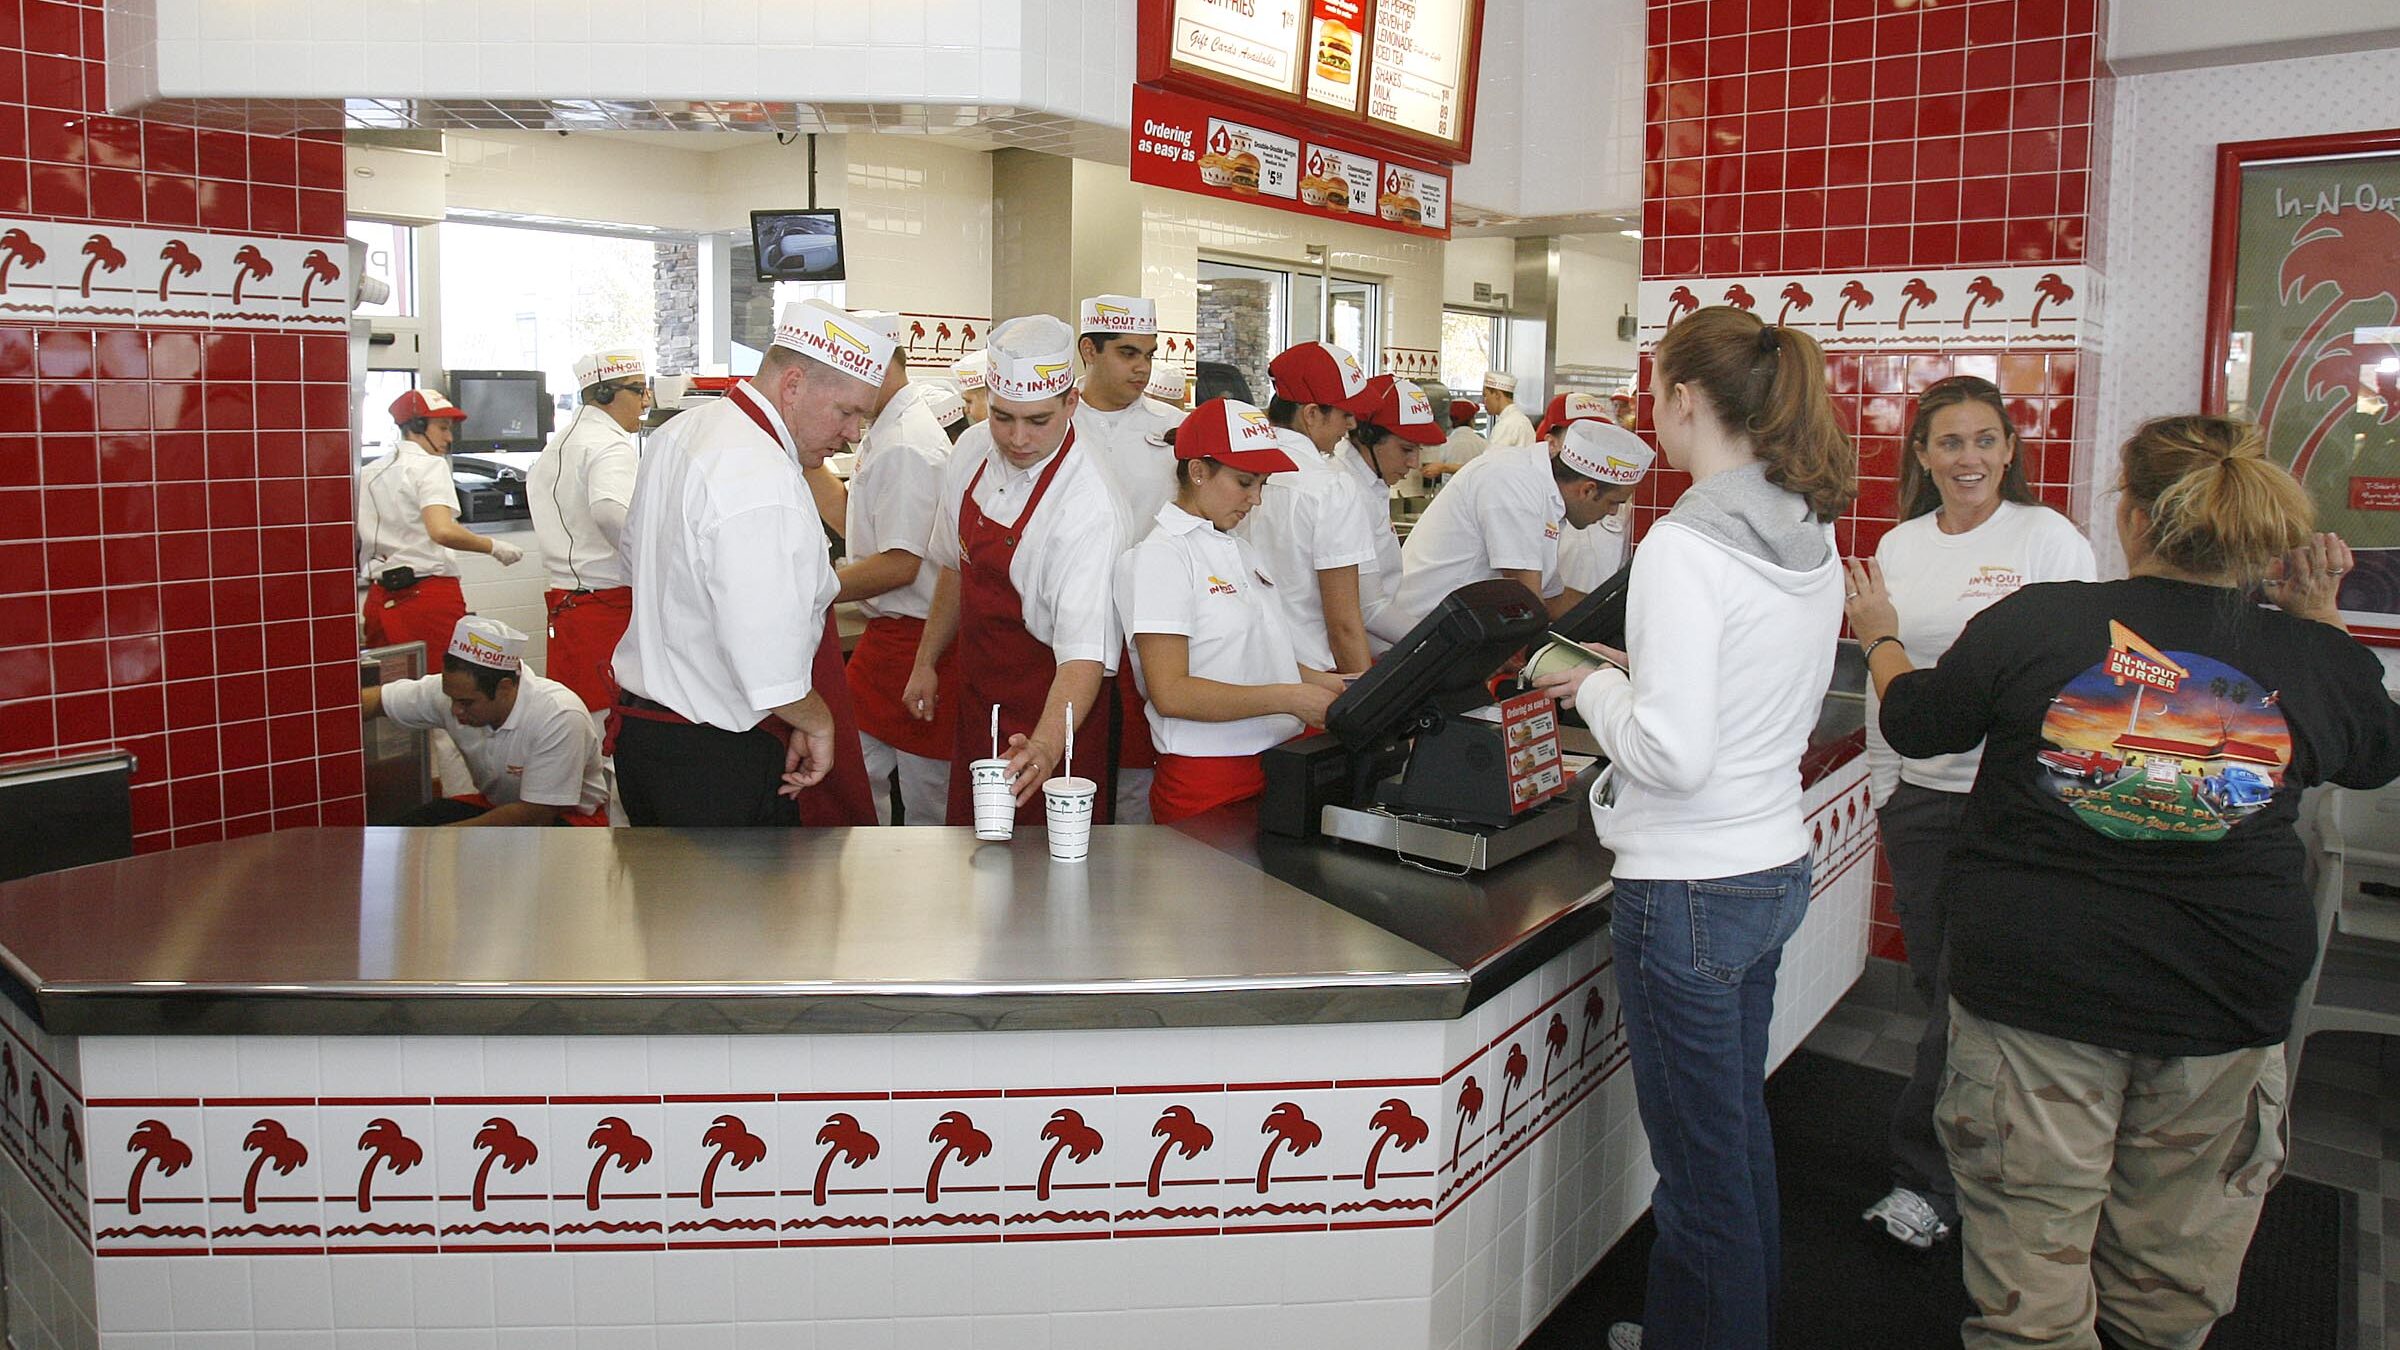 in-n-out workers serve customers at counter, the chain will ban masks for employees...